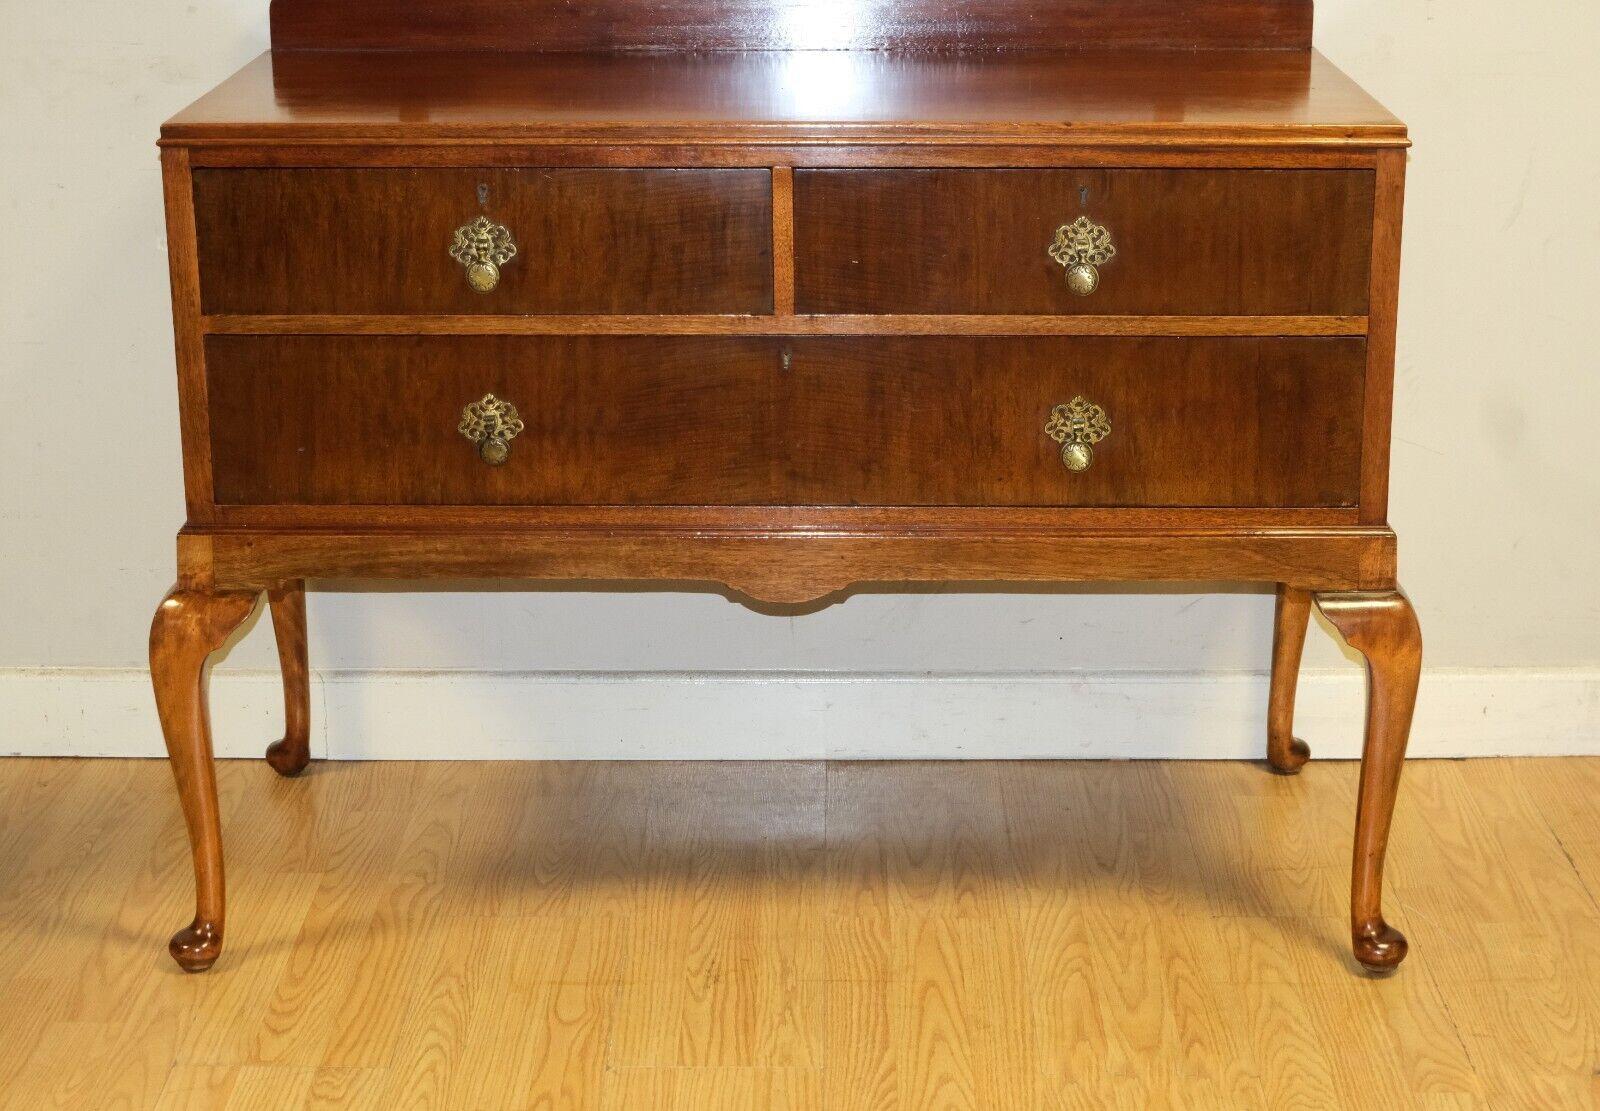 LOVELY EARLY 20TH CENTURY HARDWOOD DRESSiNG TABLE RAISED ON CABRIOLE LEGS im Angebot 4